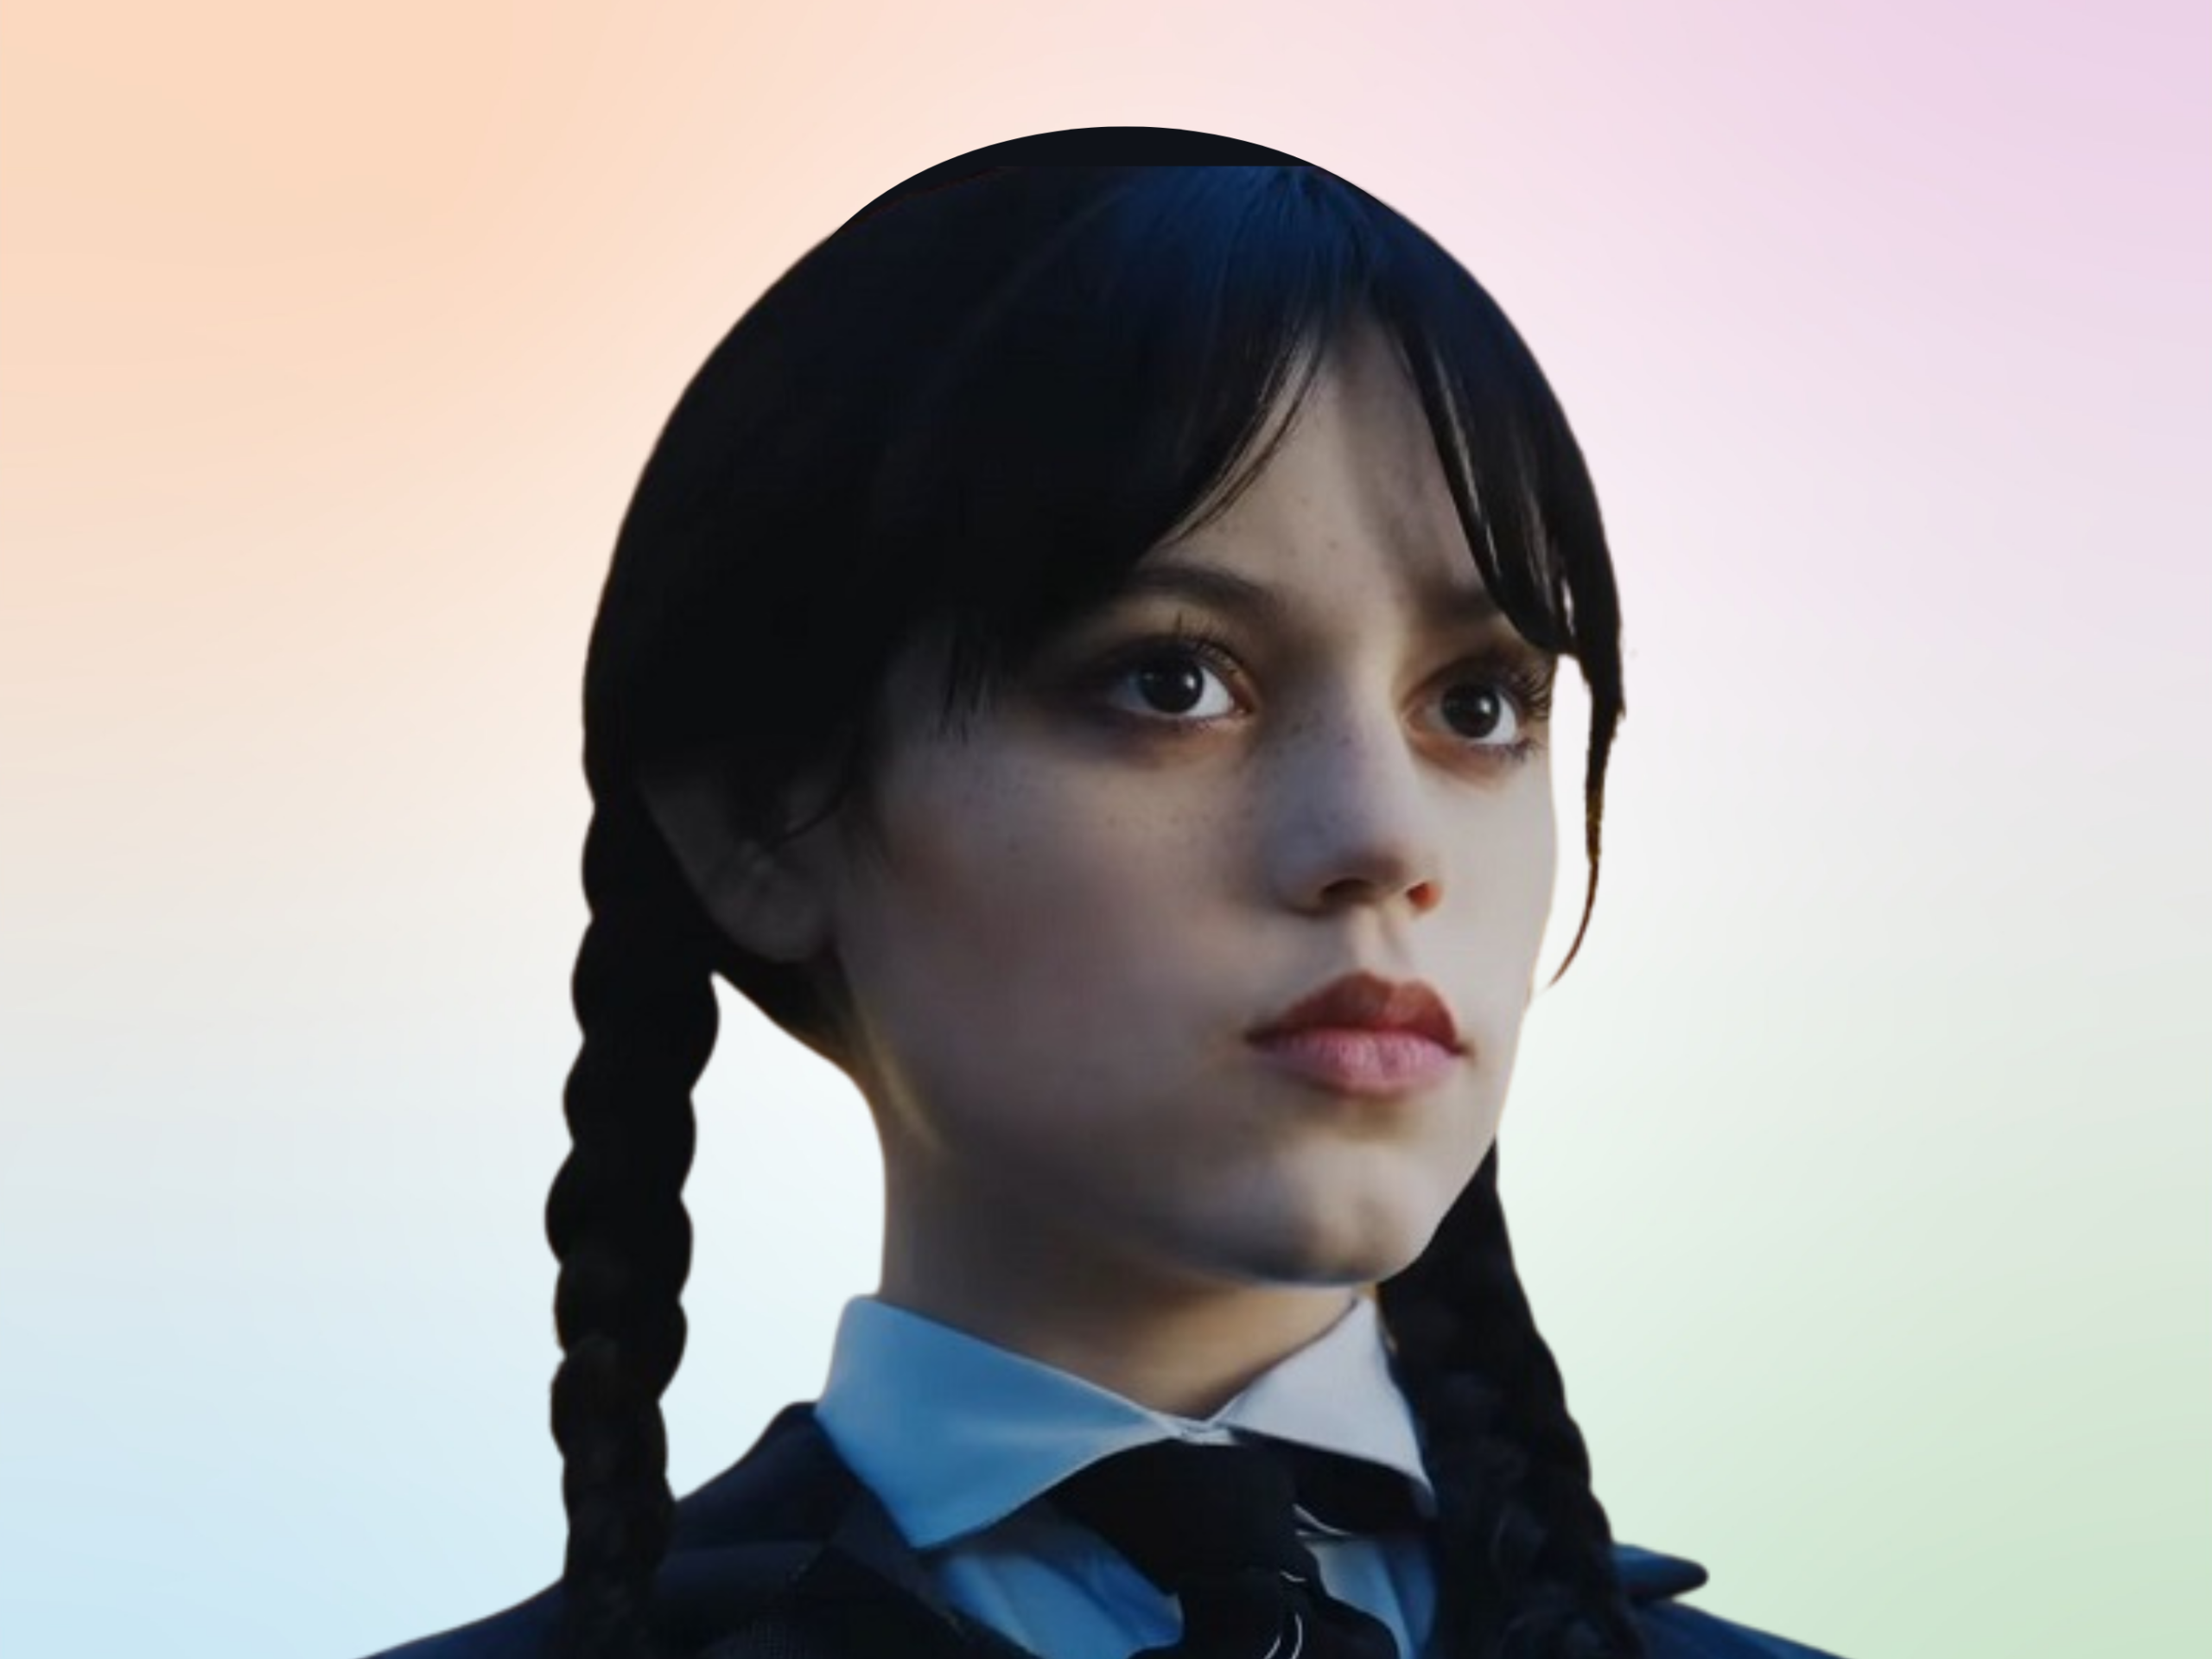 famous wednesday addams quotes